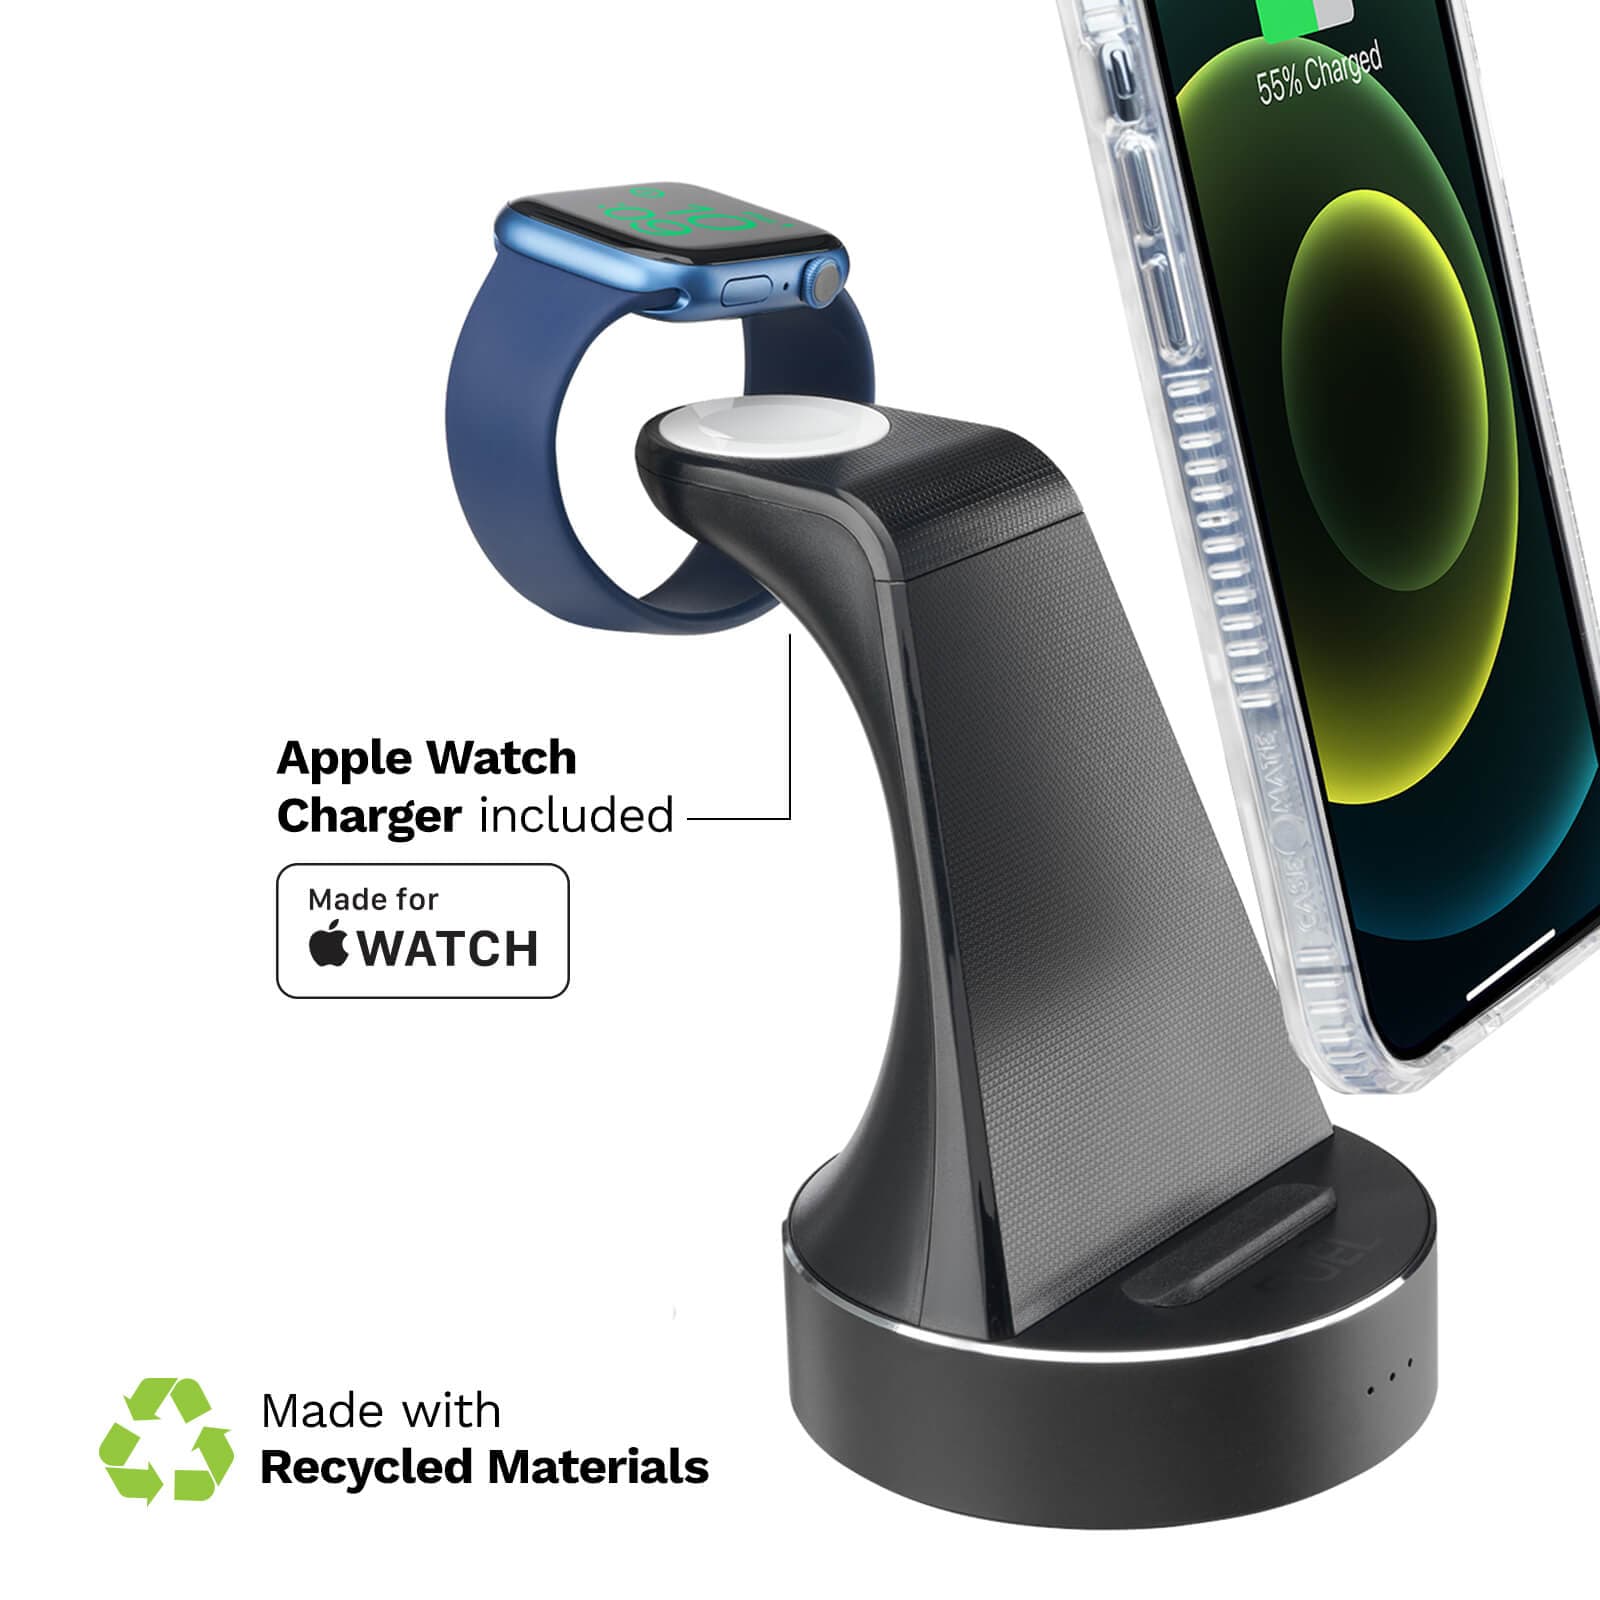 APPLE WATCH CHARGER INCLUDED (MADE FOR APPLE WATCH), MADE WITH RECYCLED MATERIALS. COLOR::BLACK